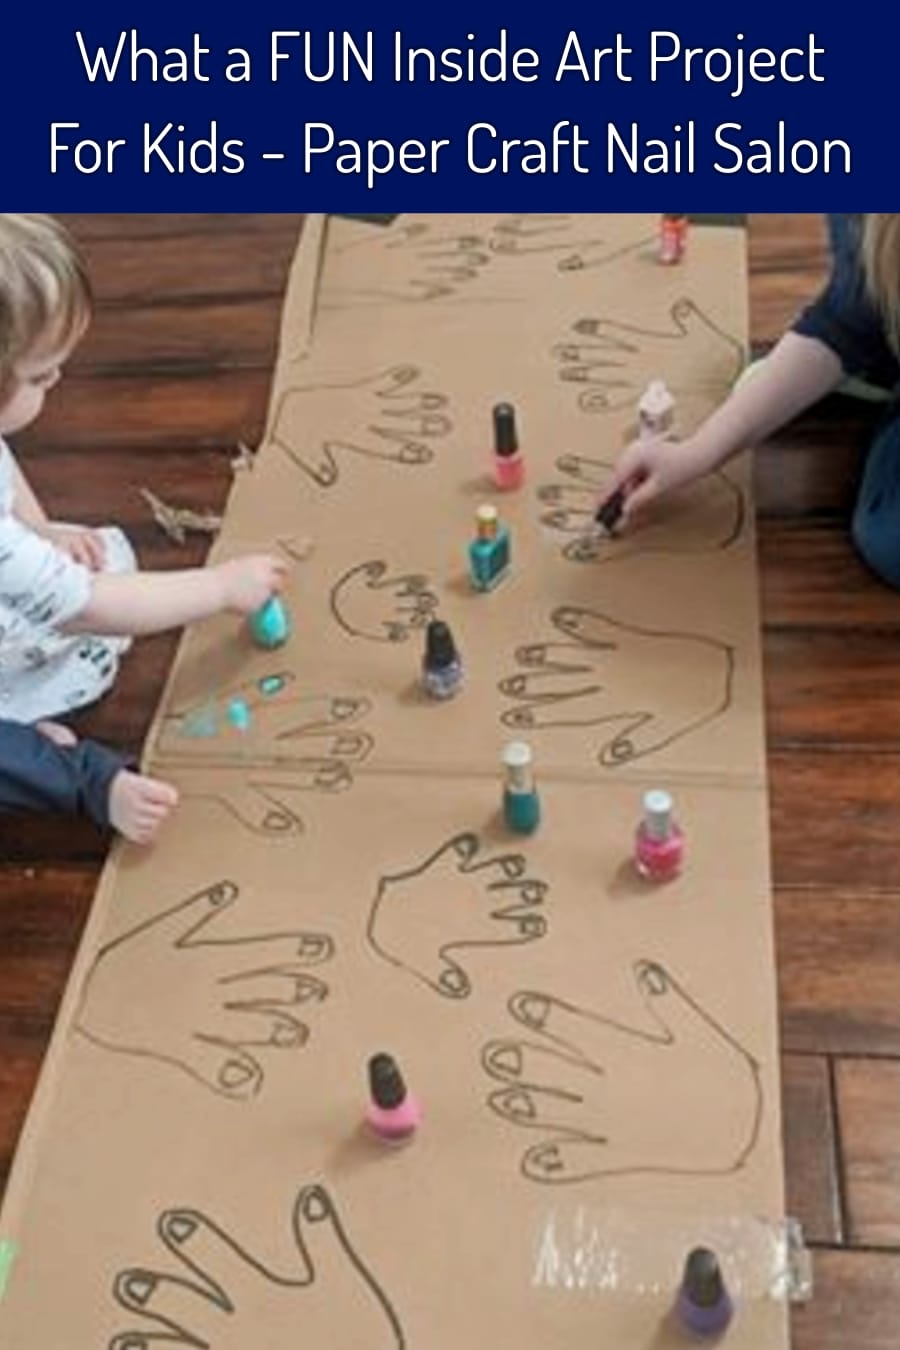 Indoor Arts and Crafts For Kids - What a FUN and easy craft project for your kids (little girls LOVE it) - take construction paper or cardboard and outline their hand prints, draw fingernails and then let them paint the nails like their own nail salon